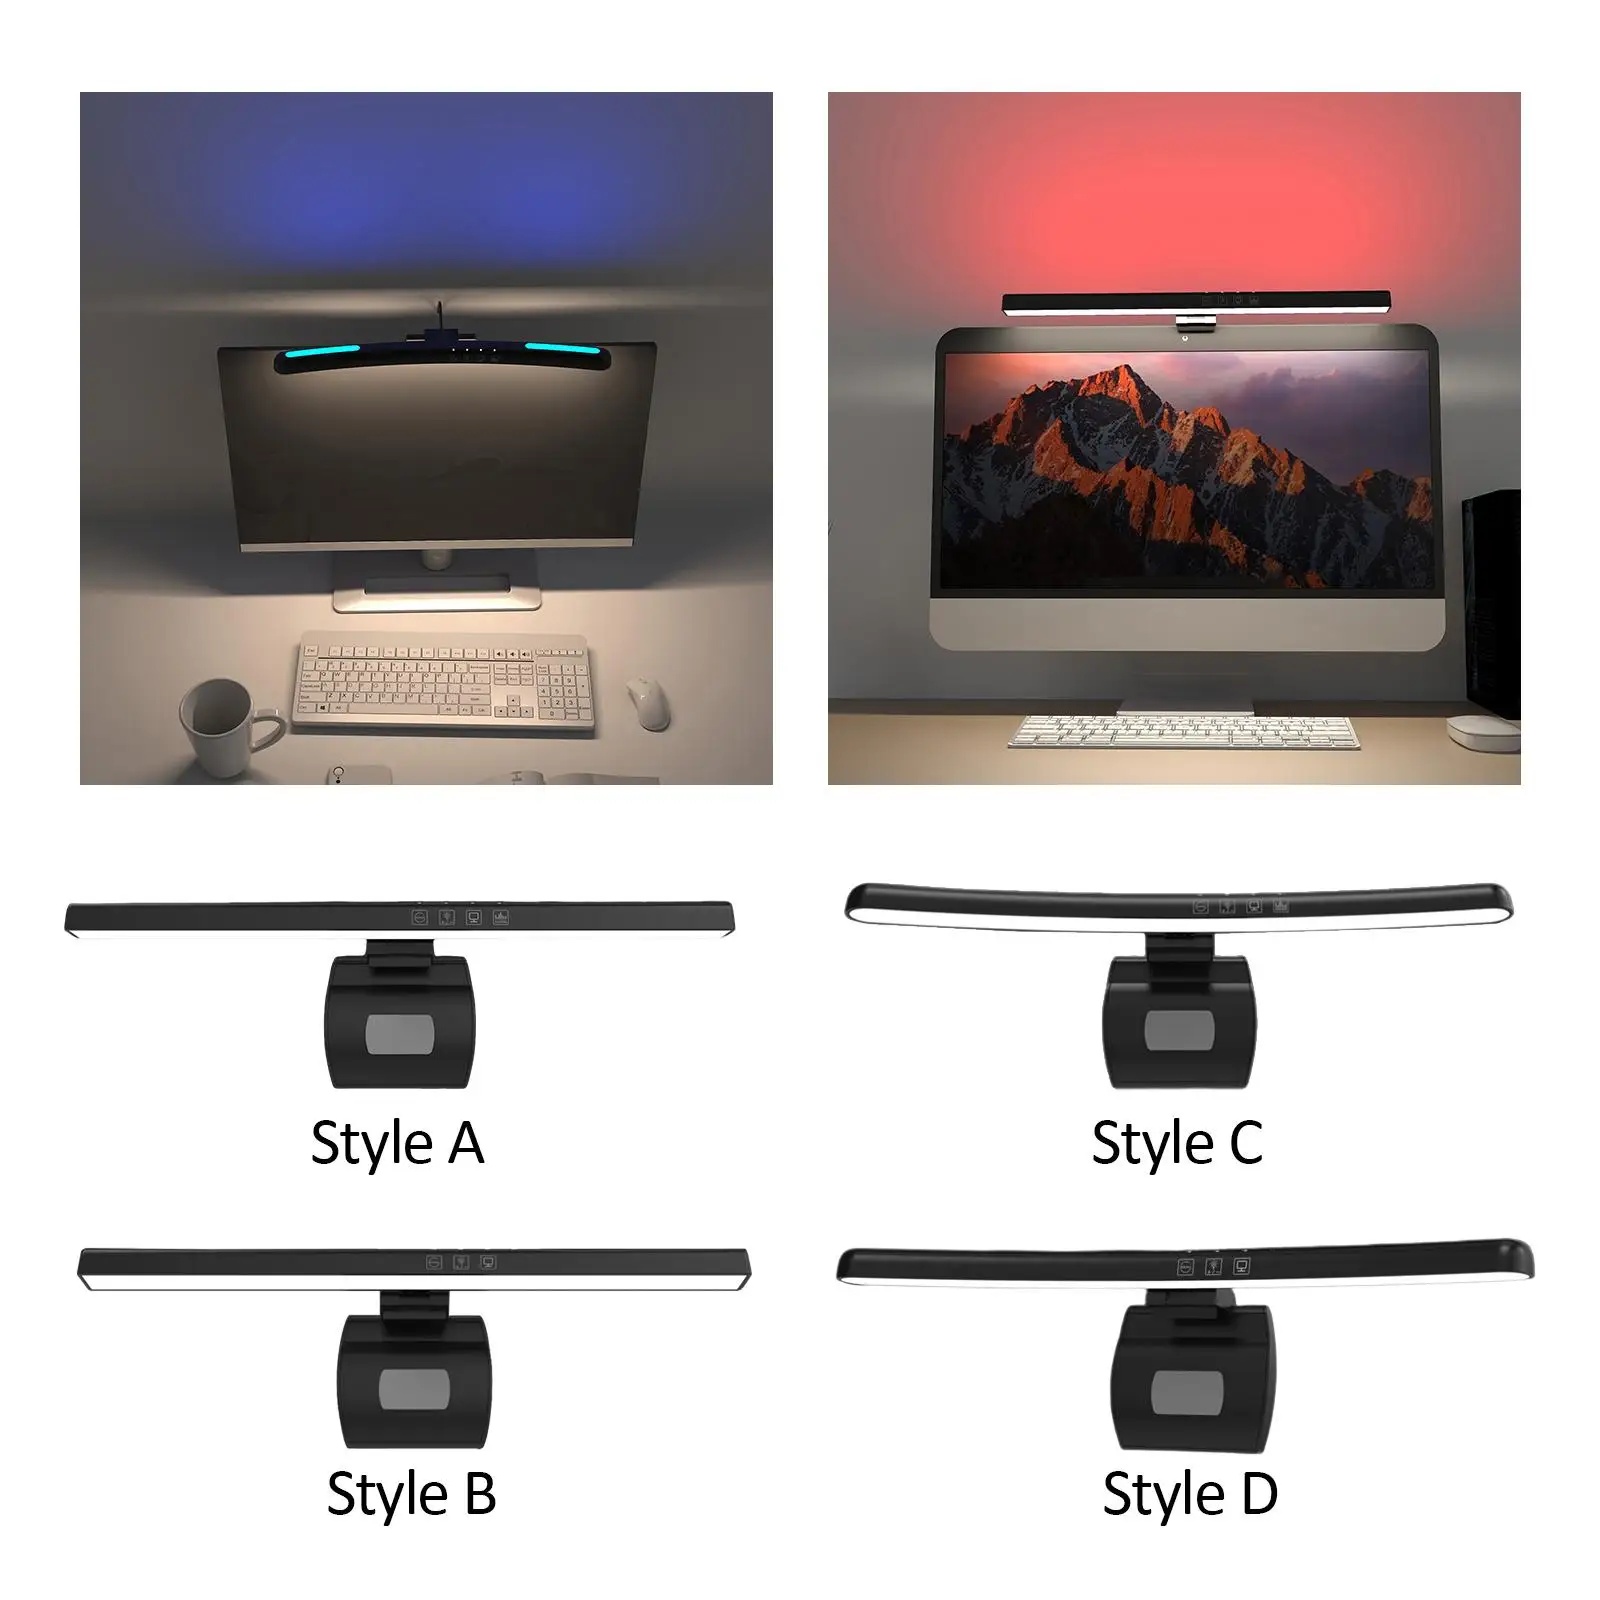 Screen Monitor Light Bar 3 Color Temperature Adjustment Modes Asymmetric Light Source Dimmable Monitor Lamp for Home Desk Office